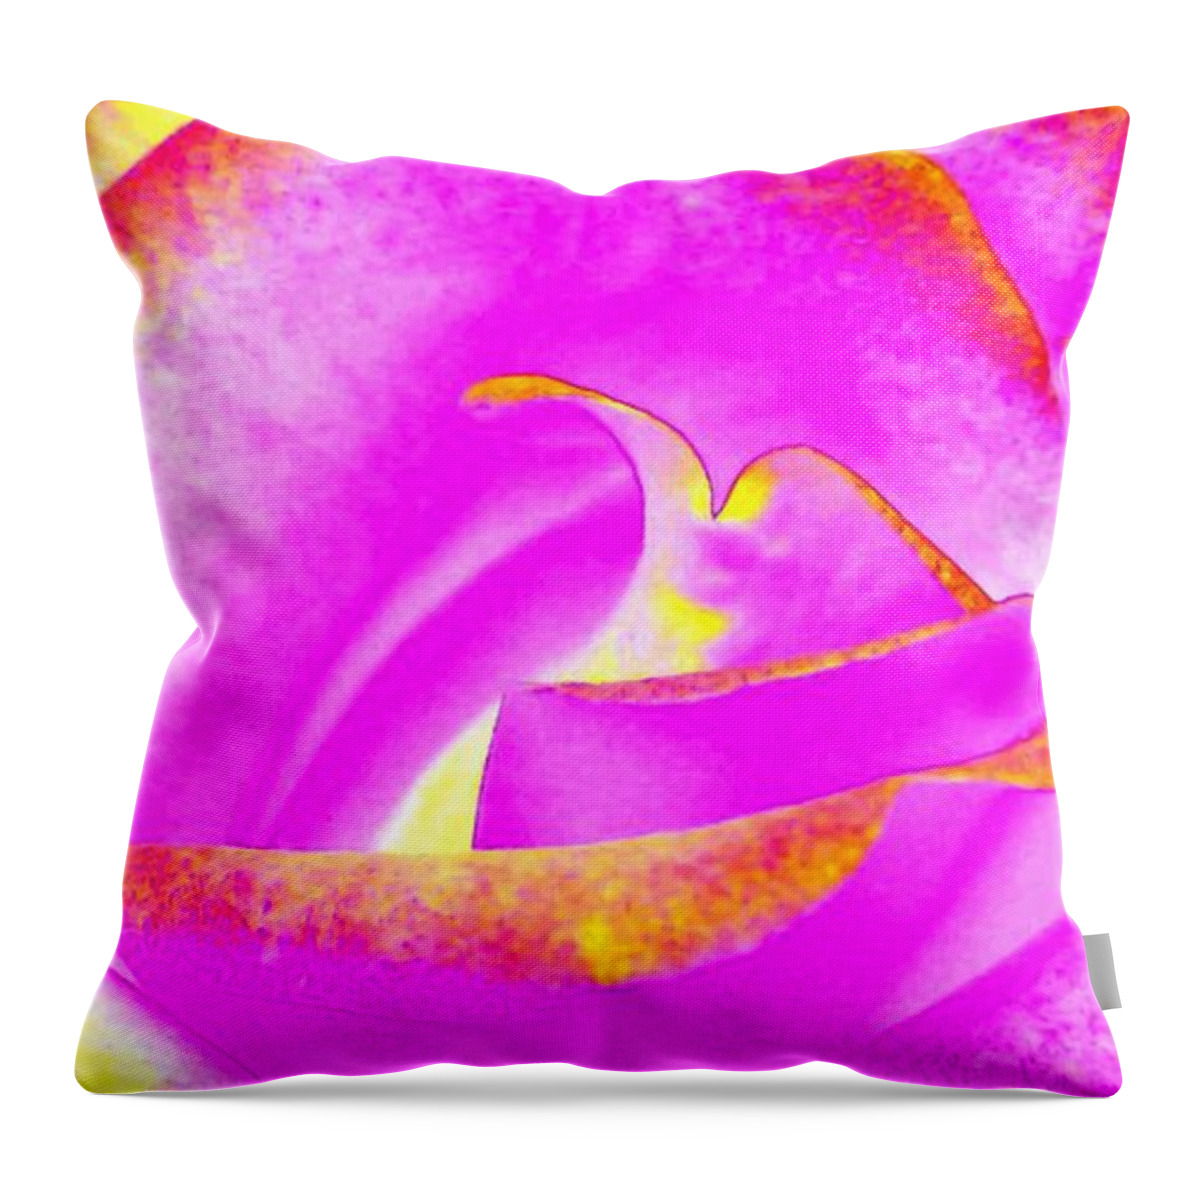 #splendidroseabstract Throw Pillow featuring the mixed media Splendid Rose Abstract by Will Borden